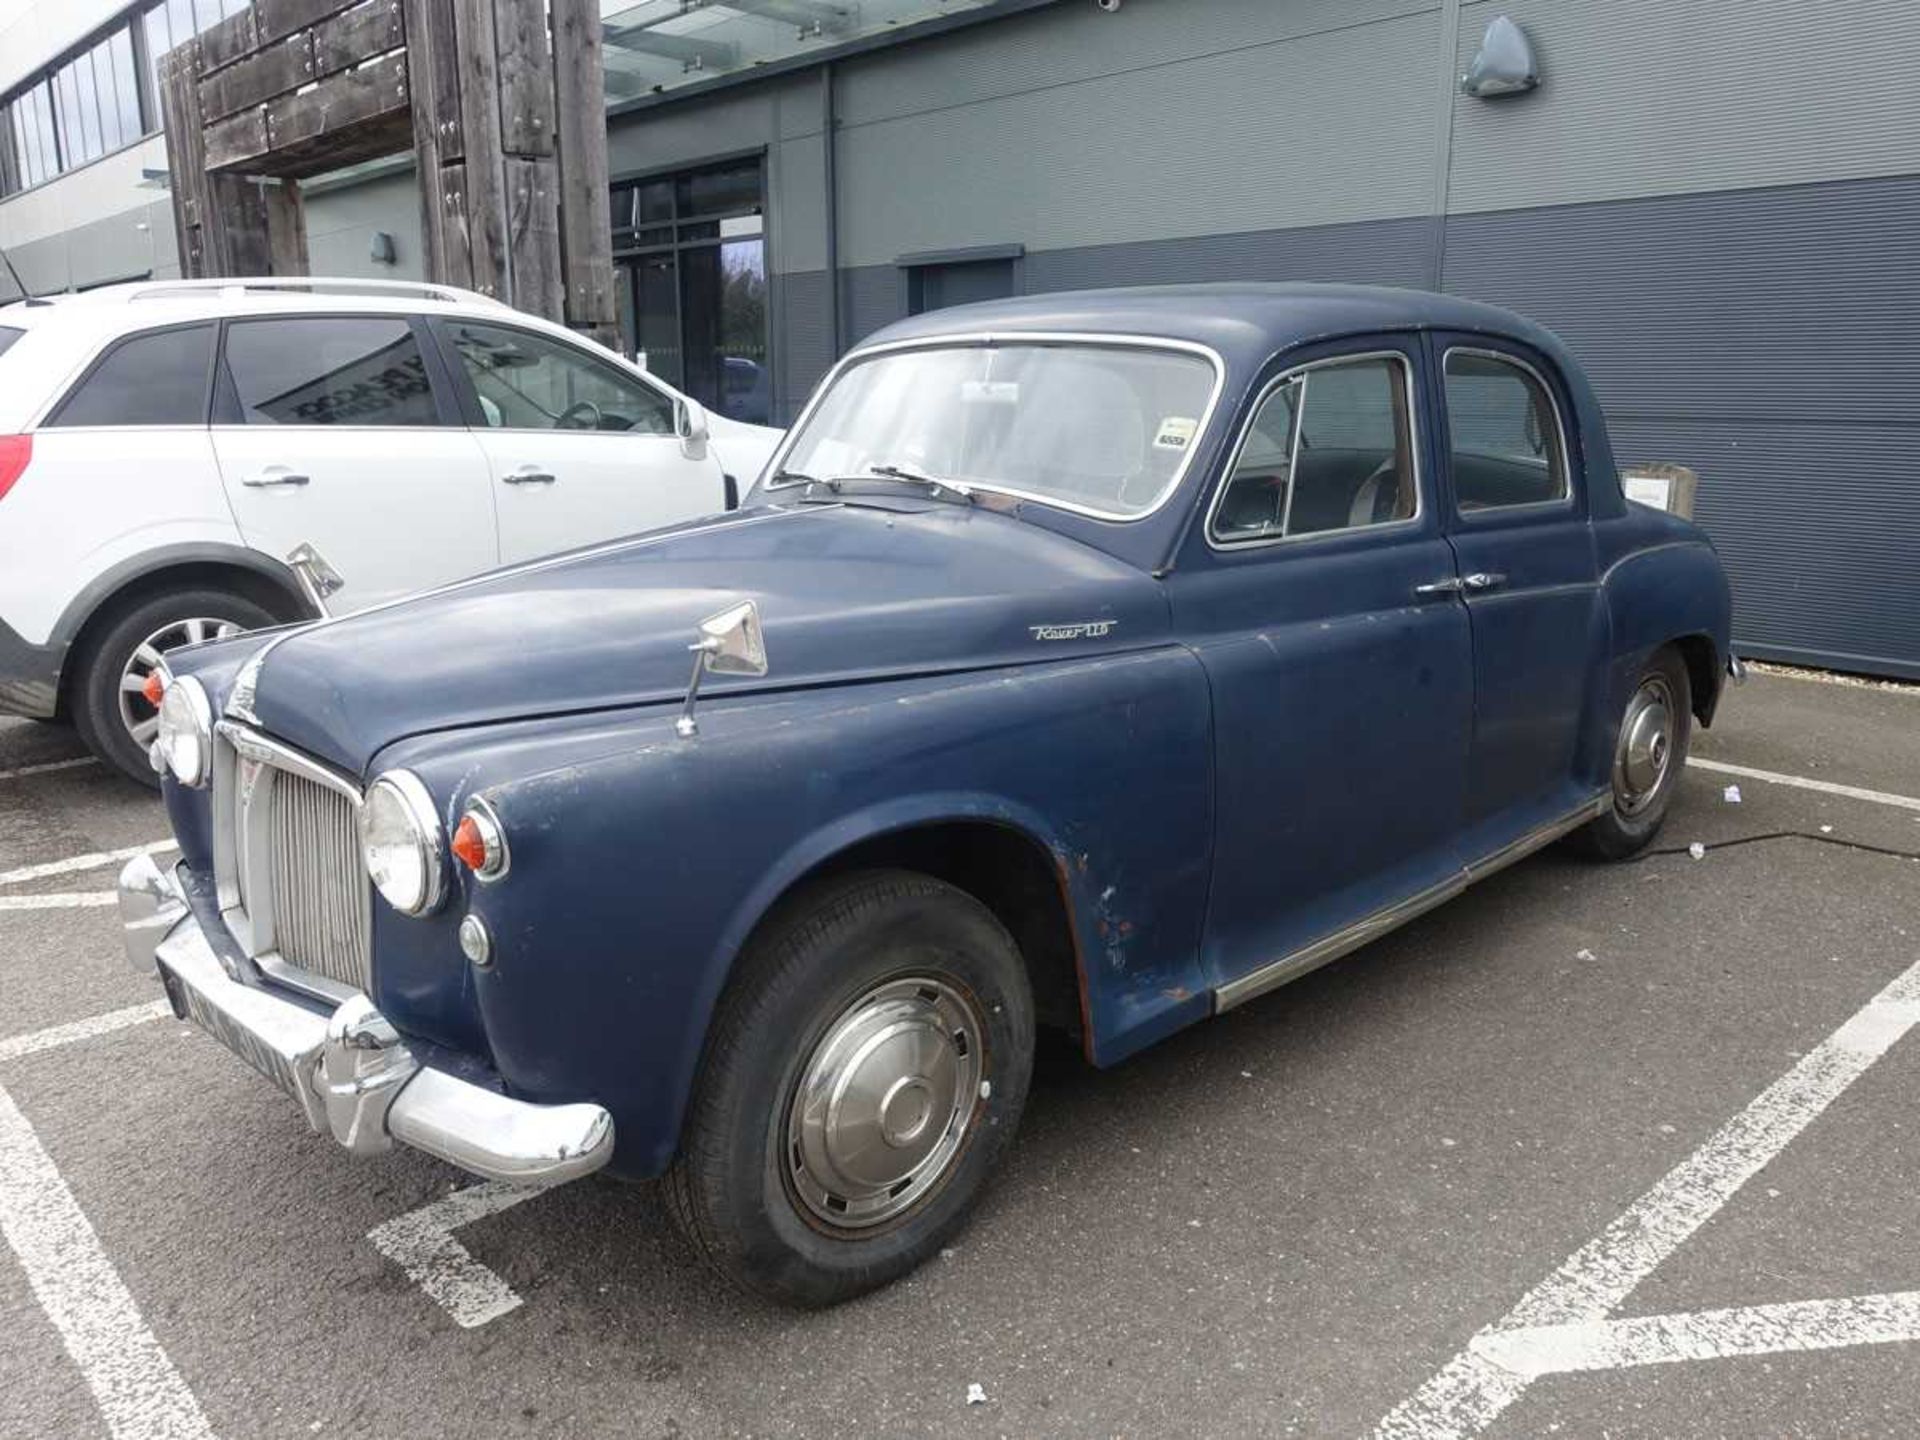 (ACK 307A) 1963 Rover P4 110 4-door saloon in blue, 2625cc petrol with overdrive, first registered - Image 2 of 7